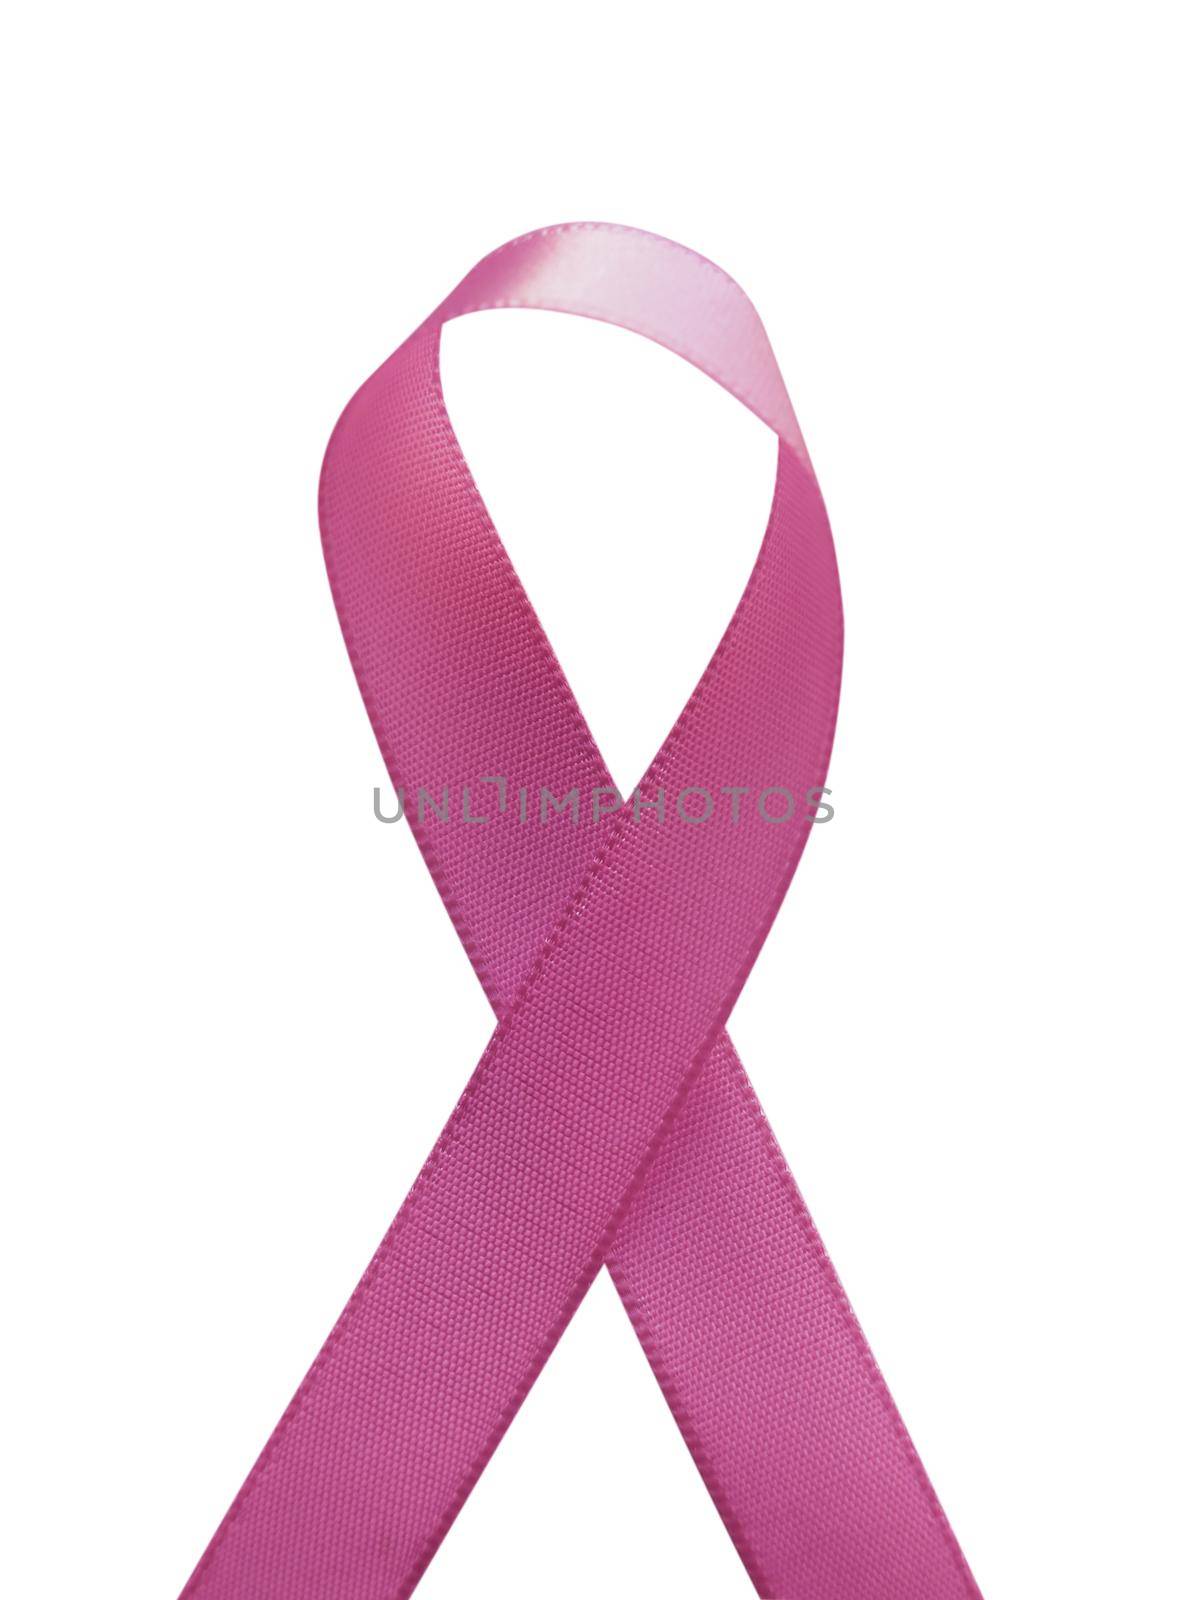 Pink ribbon against cancer isolated on white background by aroas